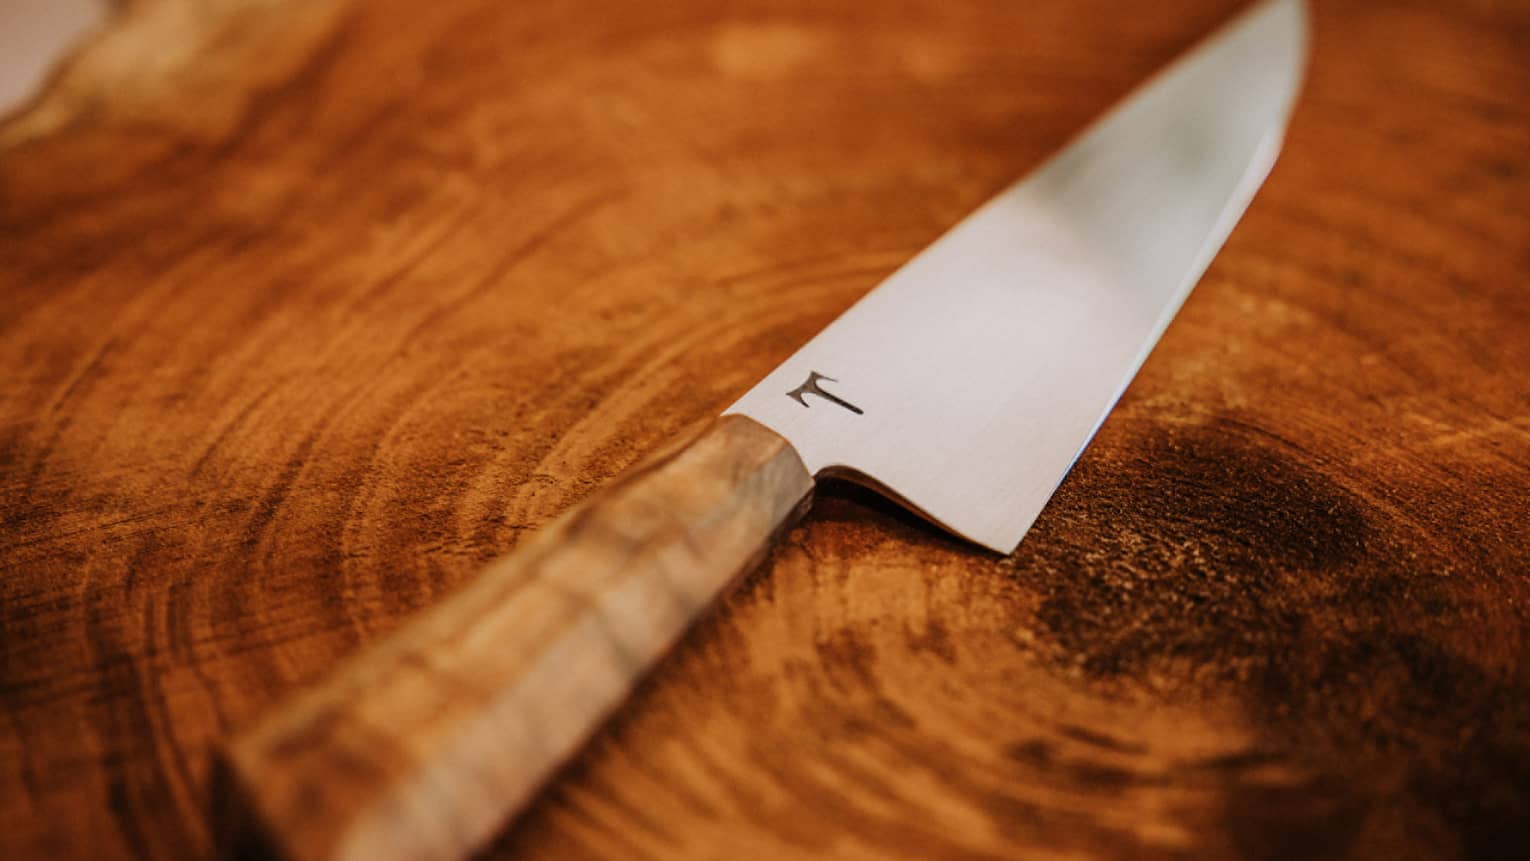 A custom chef's knife lies on a wooden table